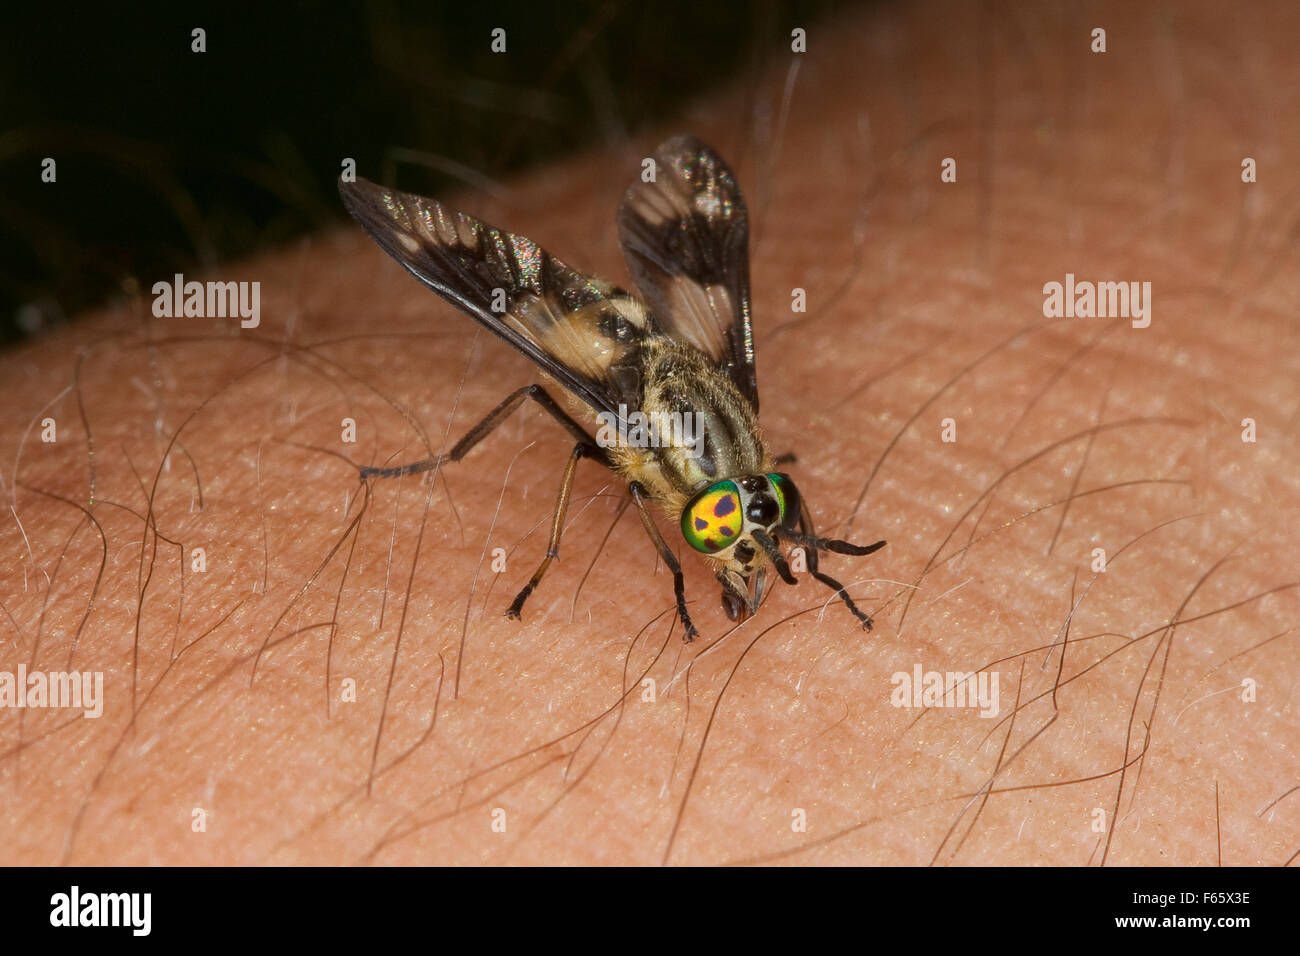 Blood Sucking Insects Stock Photos & Blood Sucking Insects Stock Images - Alamy1300 x 956